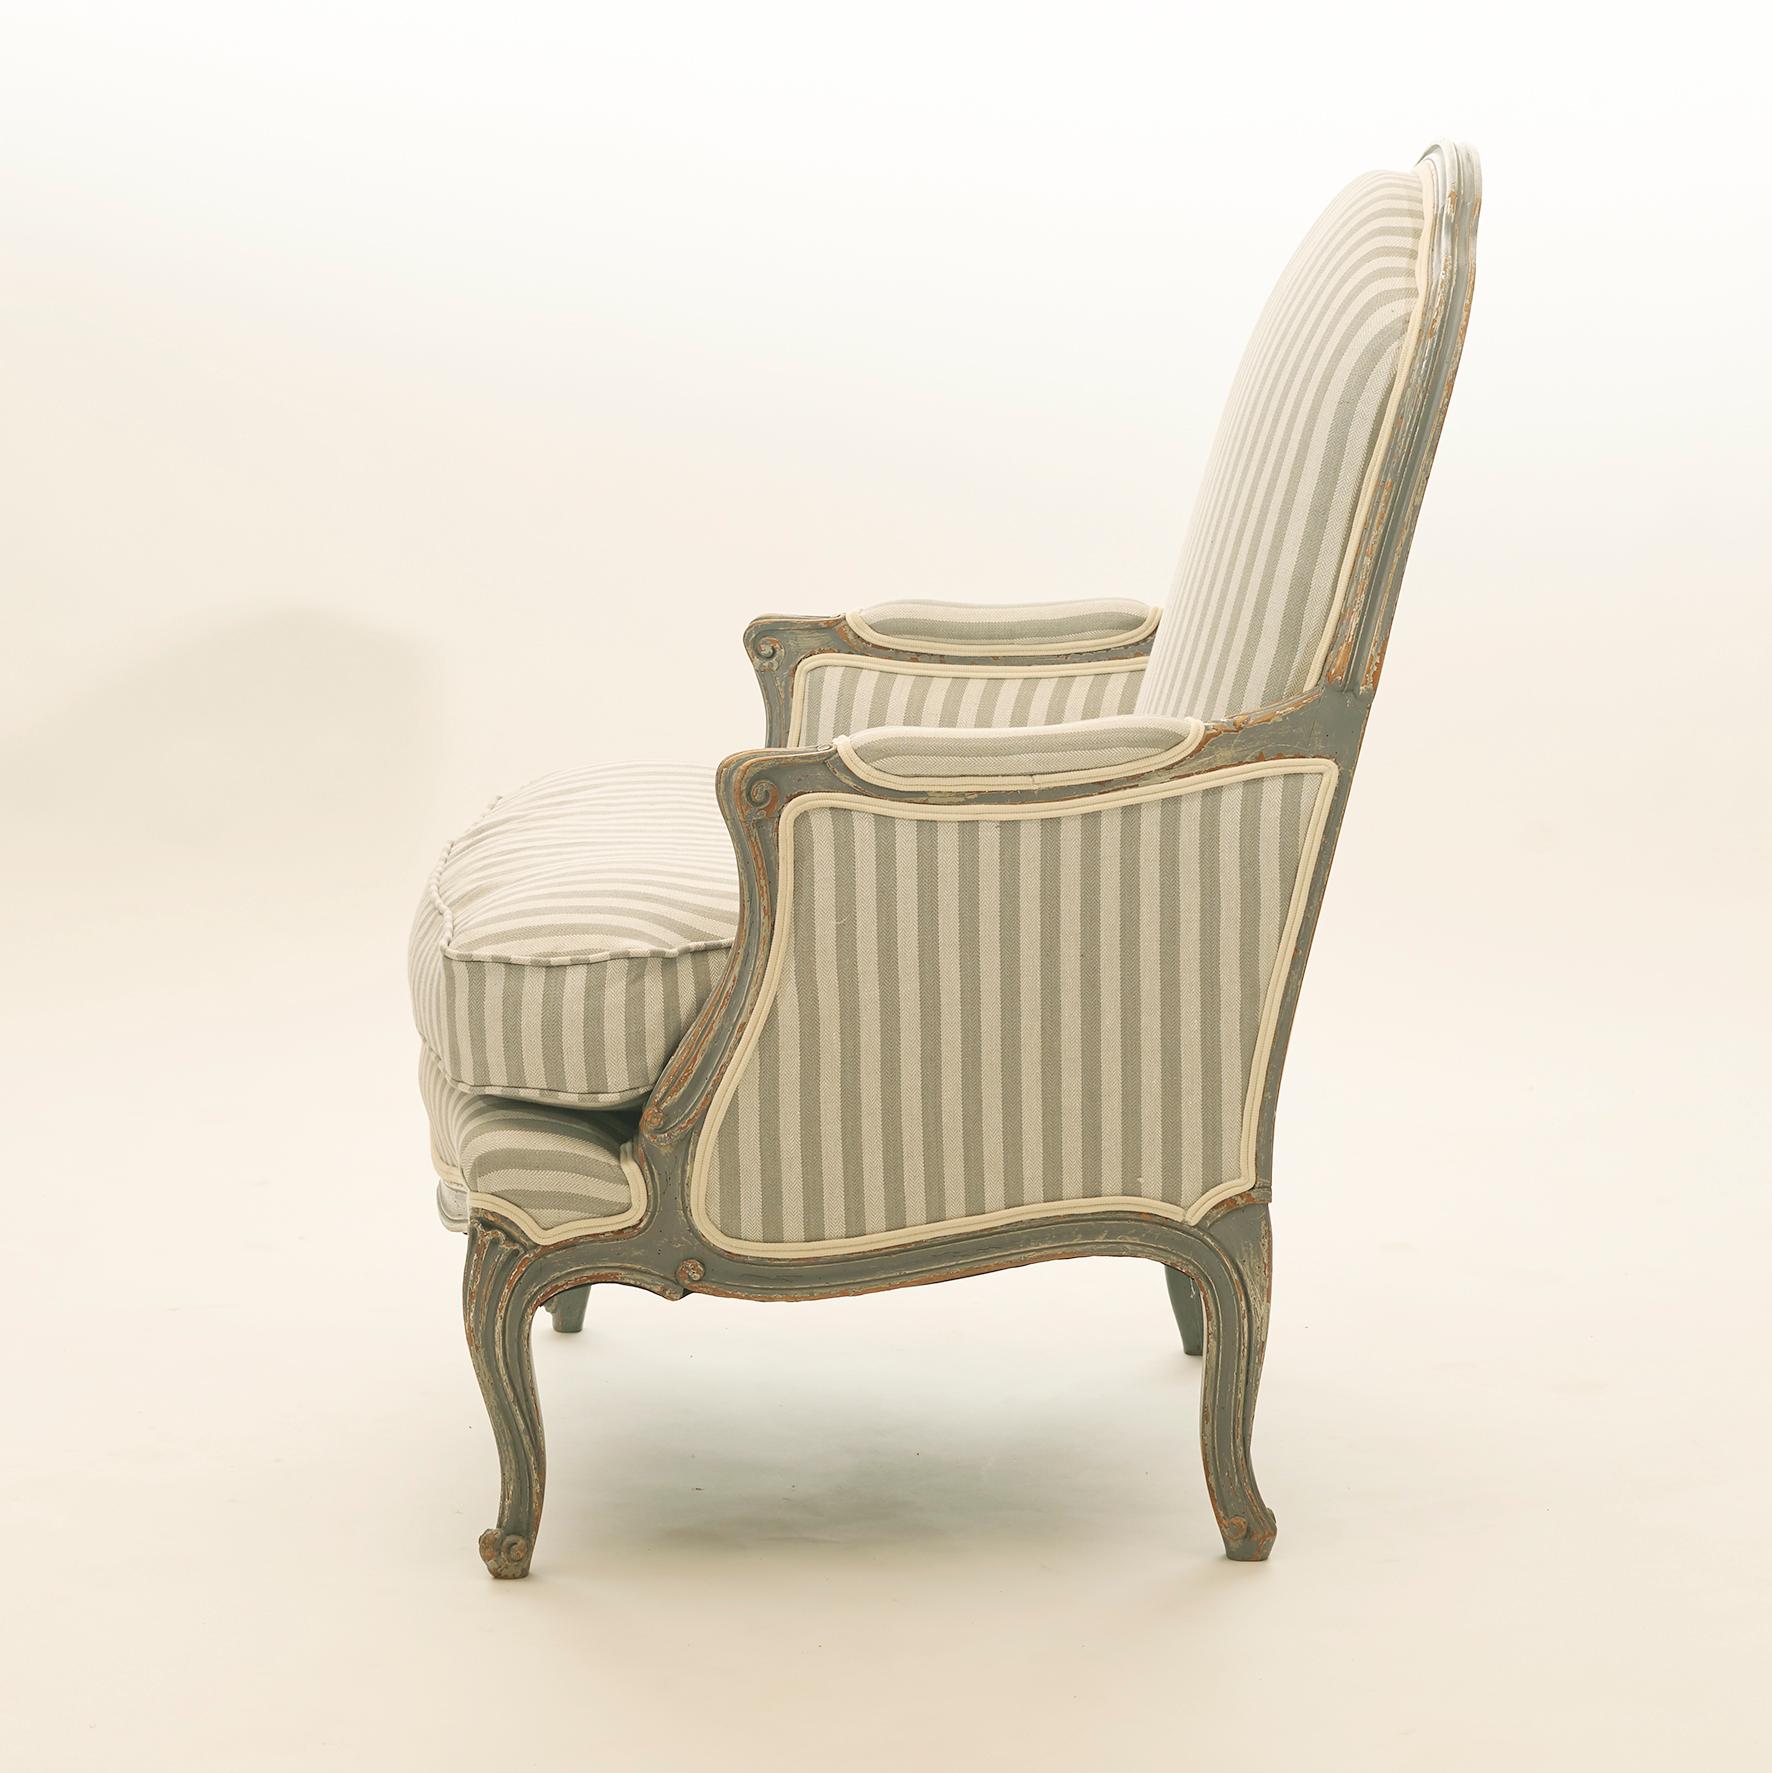 Pair of French easy chair / bergère chairs. Rococo style. Gray painted with a beautiful patina. Upholstered in new fabric in gray shades. France, circa 1920. Sold as a pair.